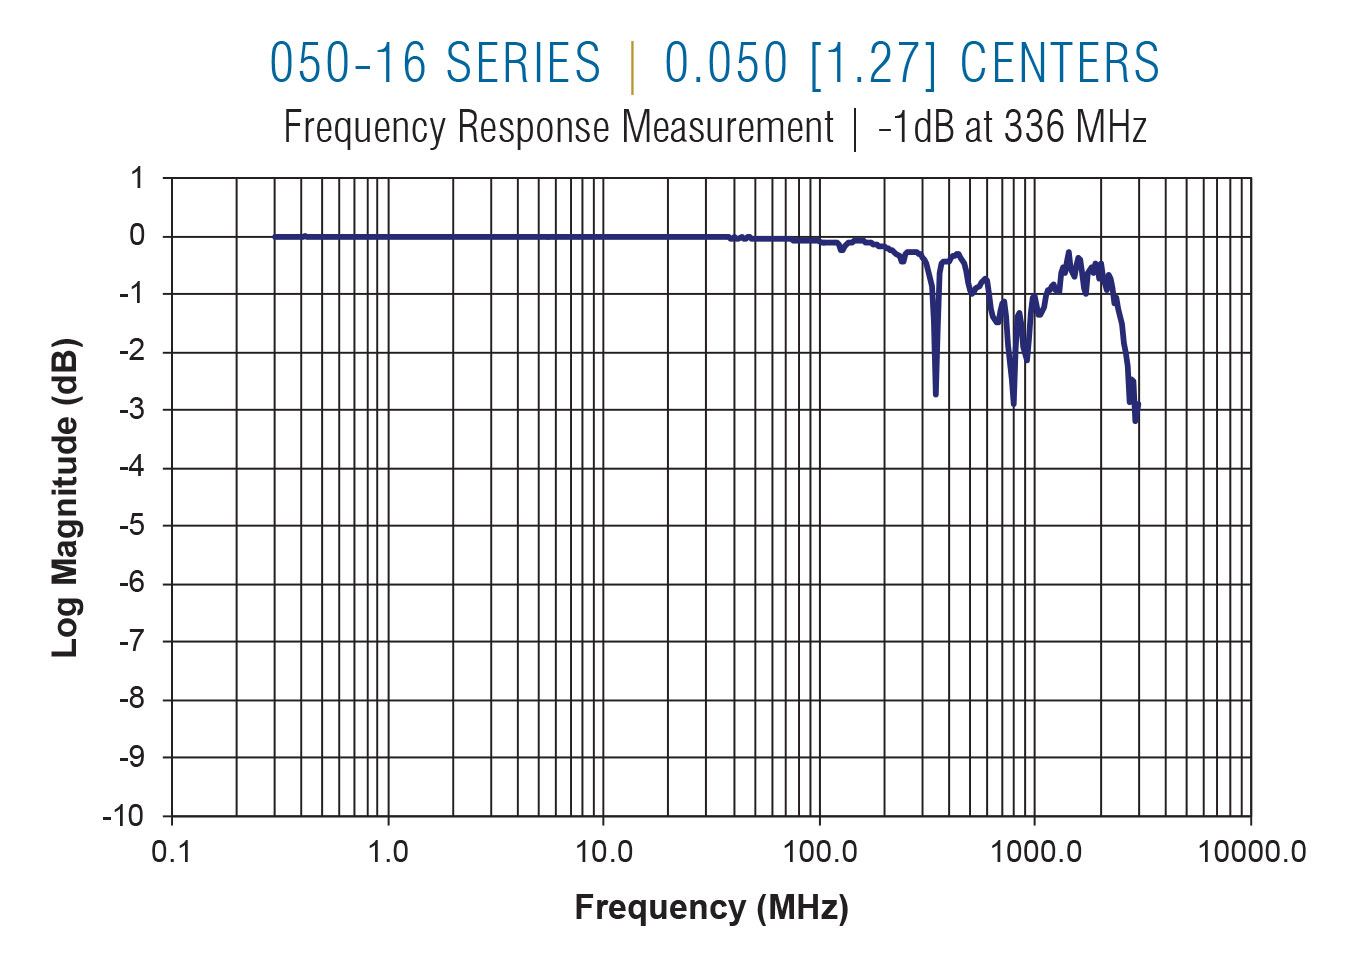 050-16 Frequency on 0.050 centers